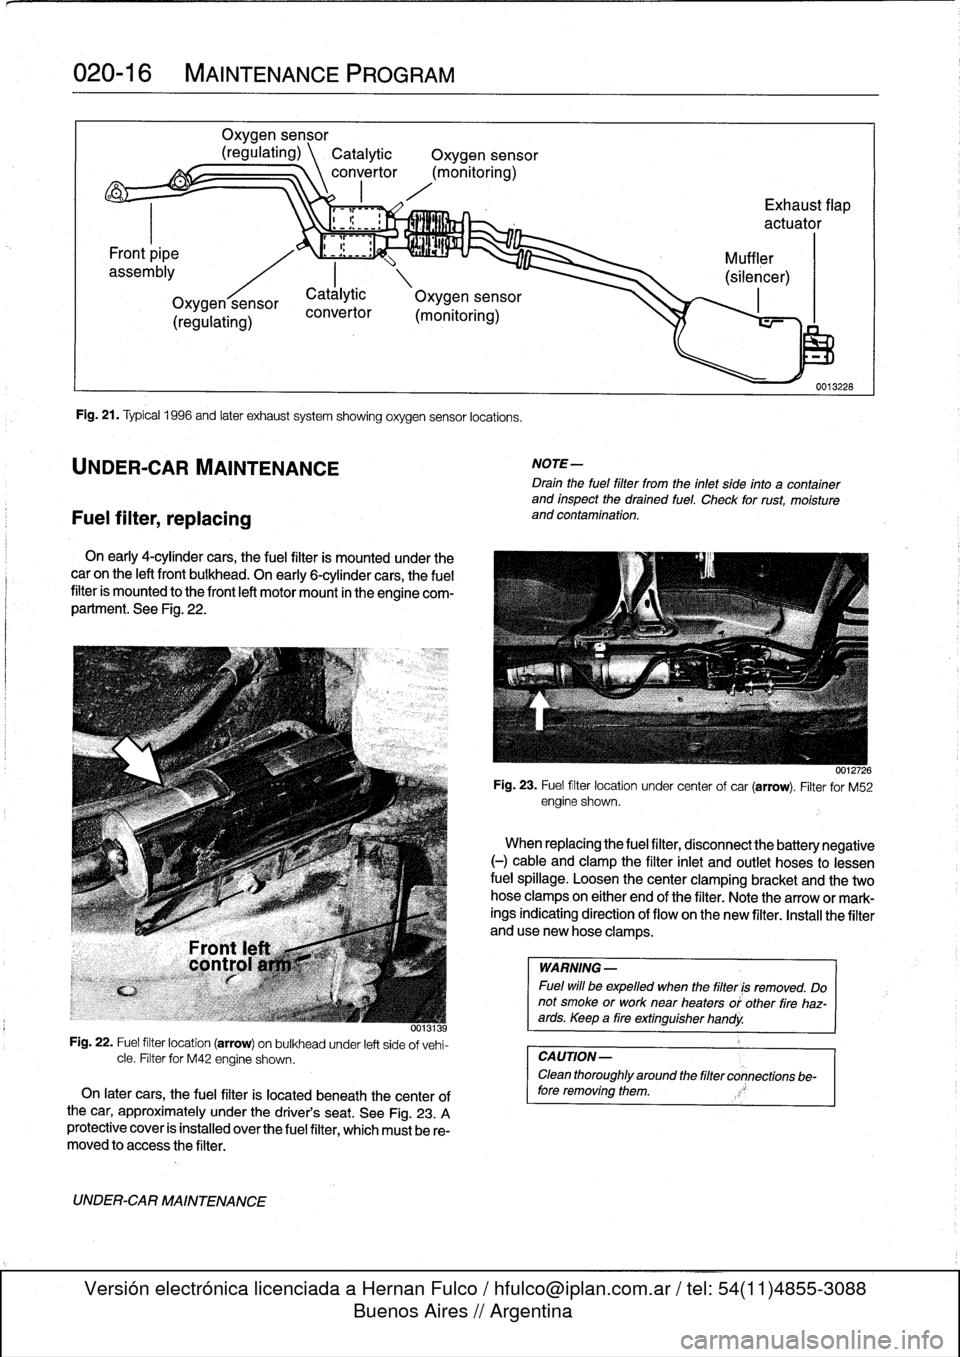 BMW 323i 1995 E36 User Guide 
020-
1
6

	

MAINTENANCE
PROGRAM

Fuel
filter,
replacing

Oxygen
sensor

(regulating)
\
Catalytic

	

Oxygen
sensor
convertor
(monitoring)

Fig
.
21
.
Typical
1996
and
later
exhaust
system
showing
ox